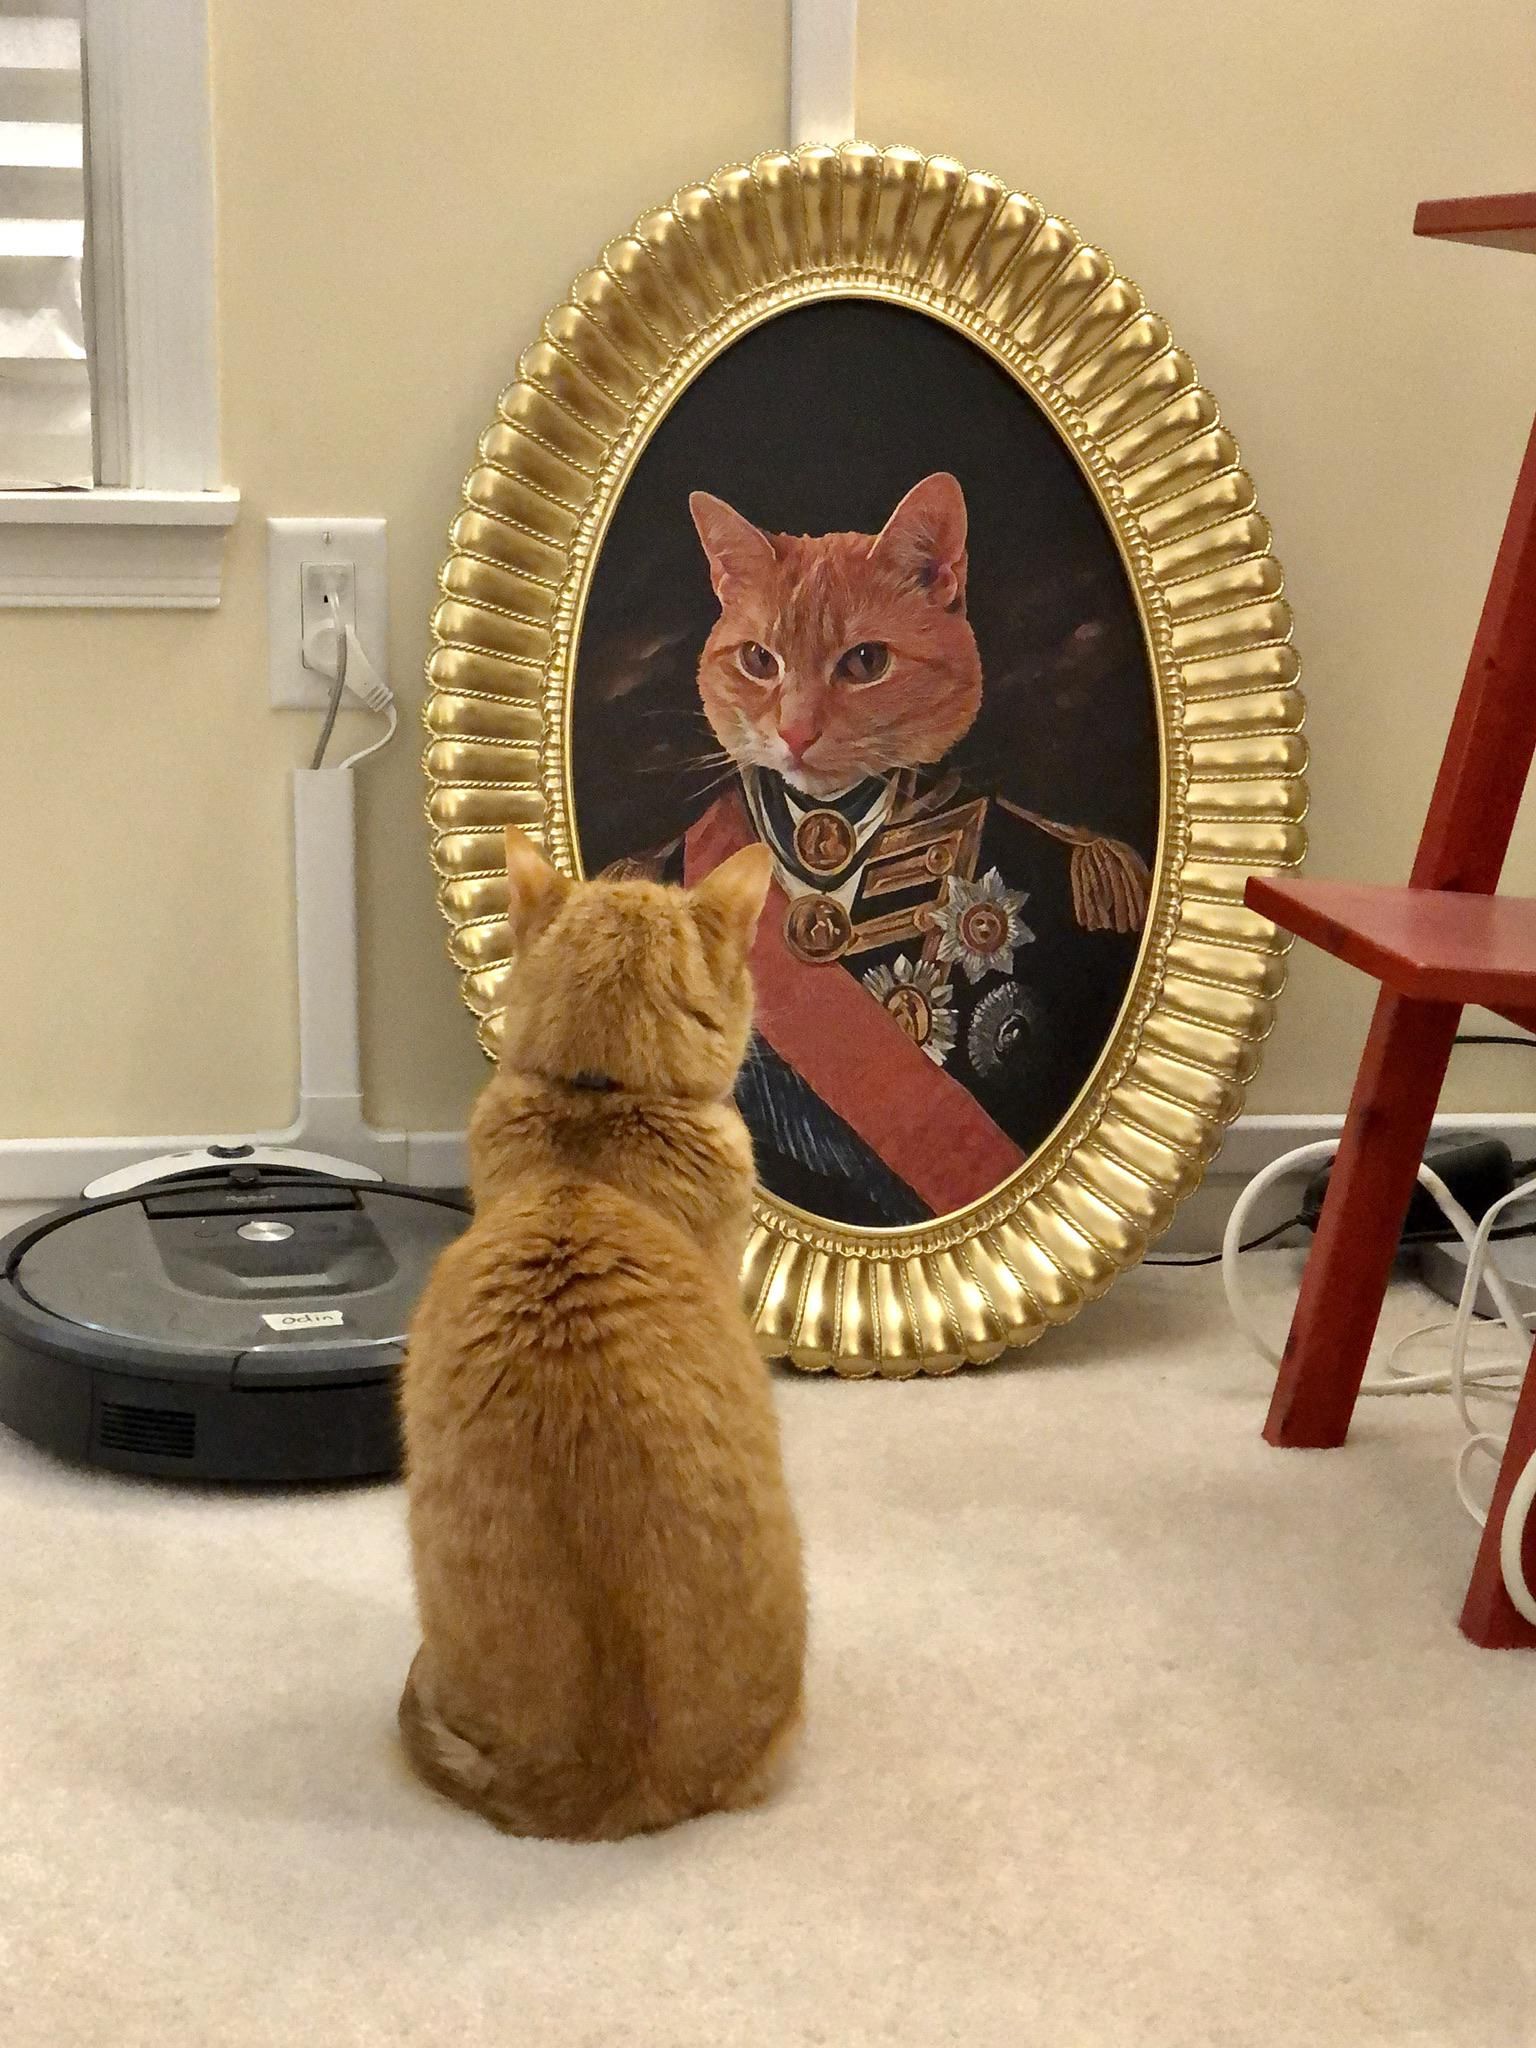 Wife asked if we could hang a picture of the cat in the hallway. Photoshop to the rescue!